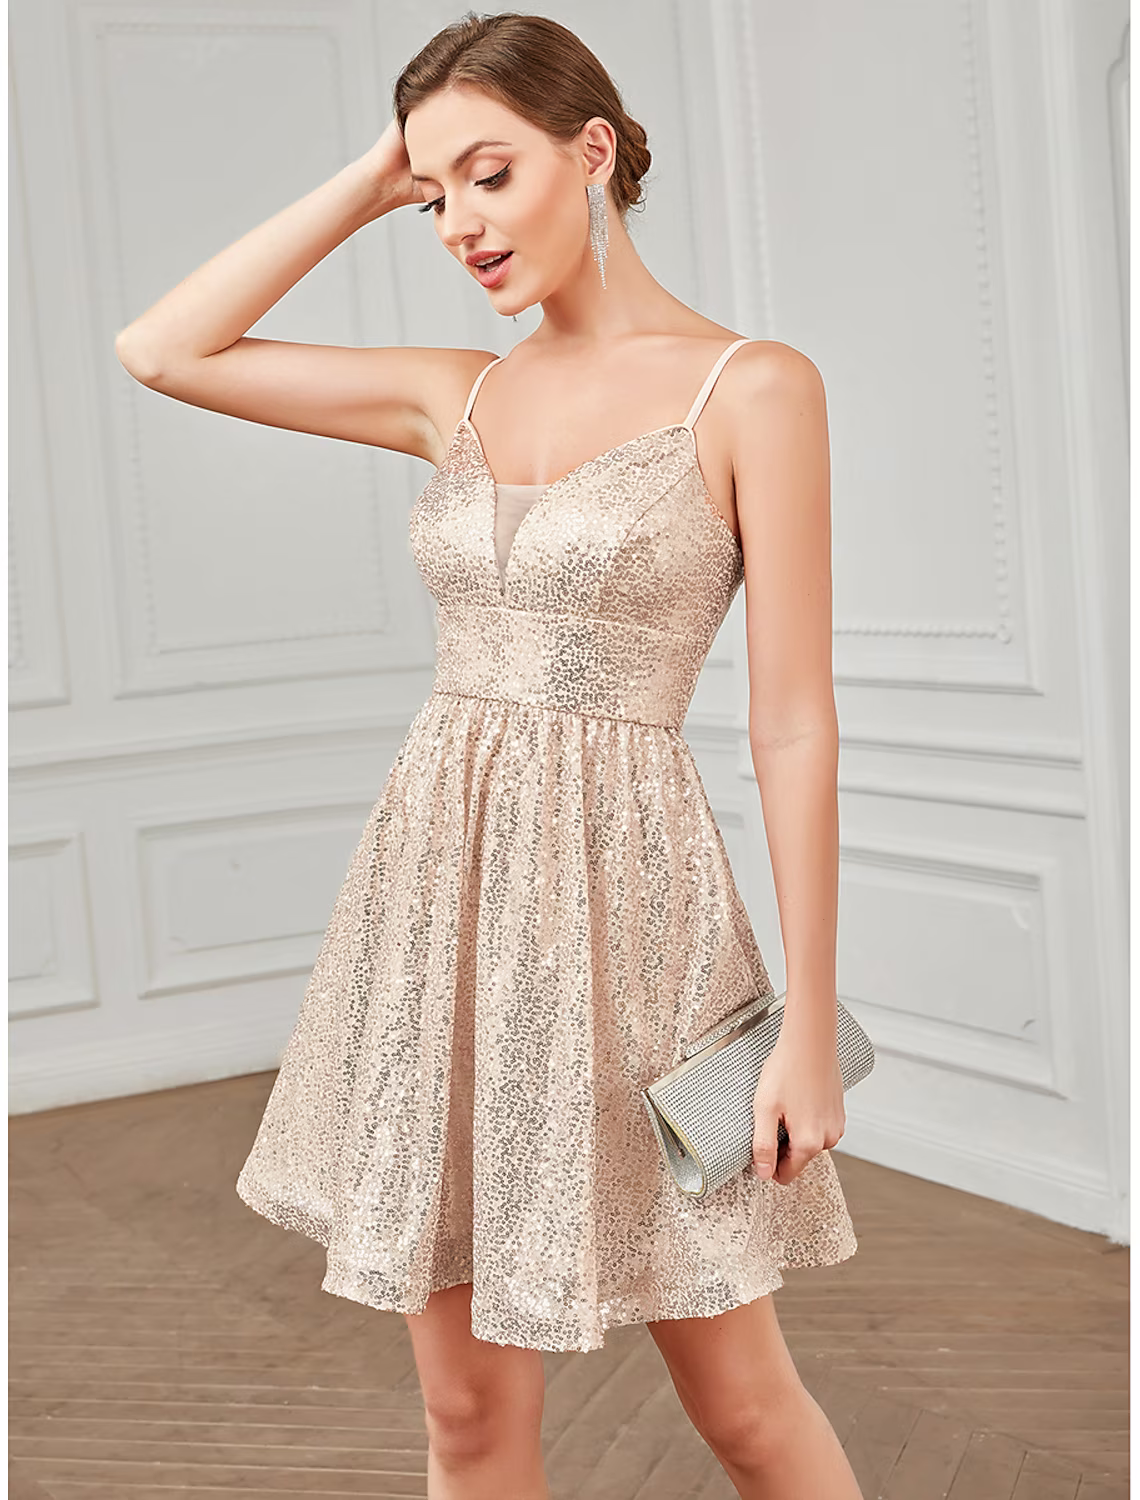 A-Line Homecoming Dresses Vintage Dress Homecoming Short Mini Sleeveless V Neck Sequined with Glitter Sequin